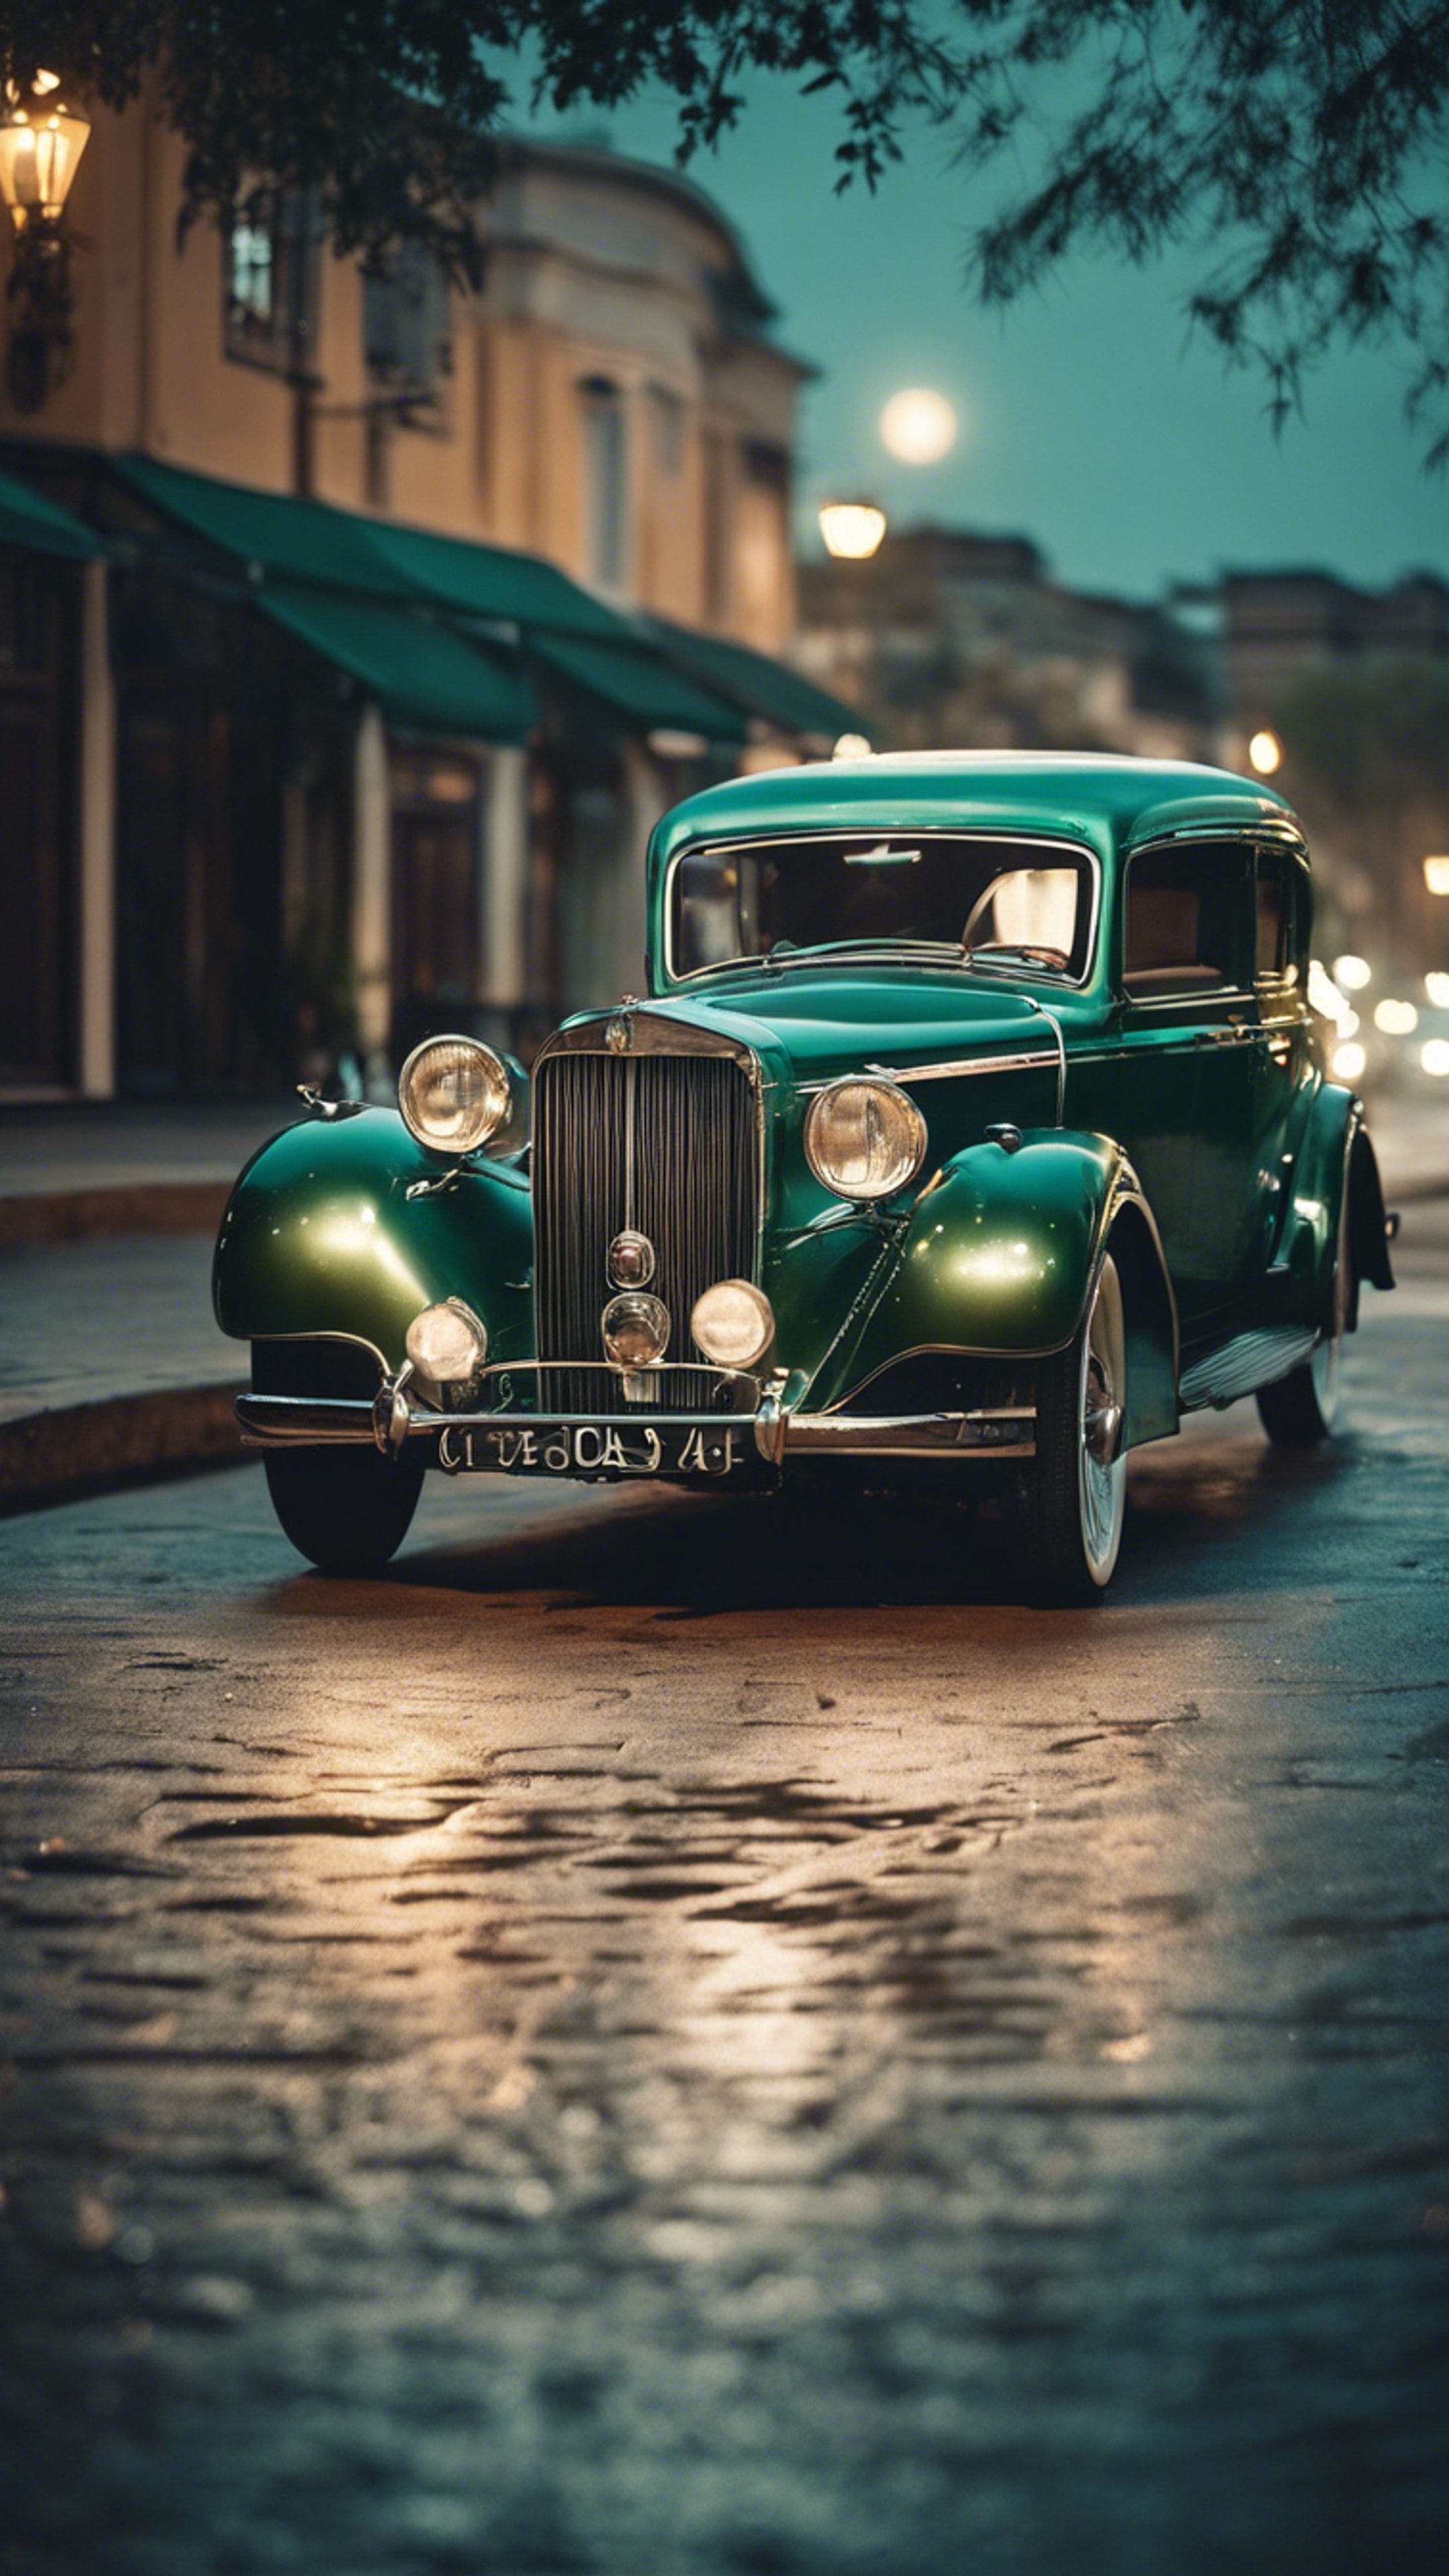 A luxurious antique car painted in cool dark green under the moonlight. Tapet[5cdba2e68b66456f8c5a]